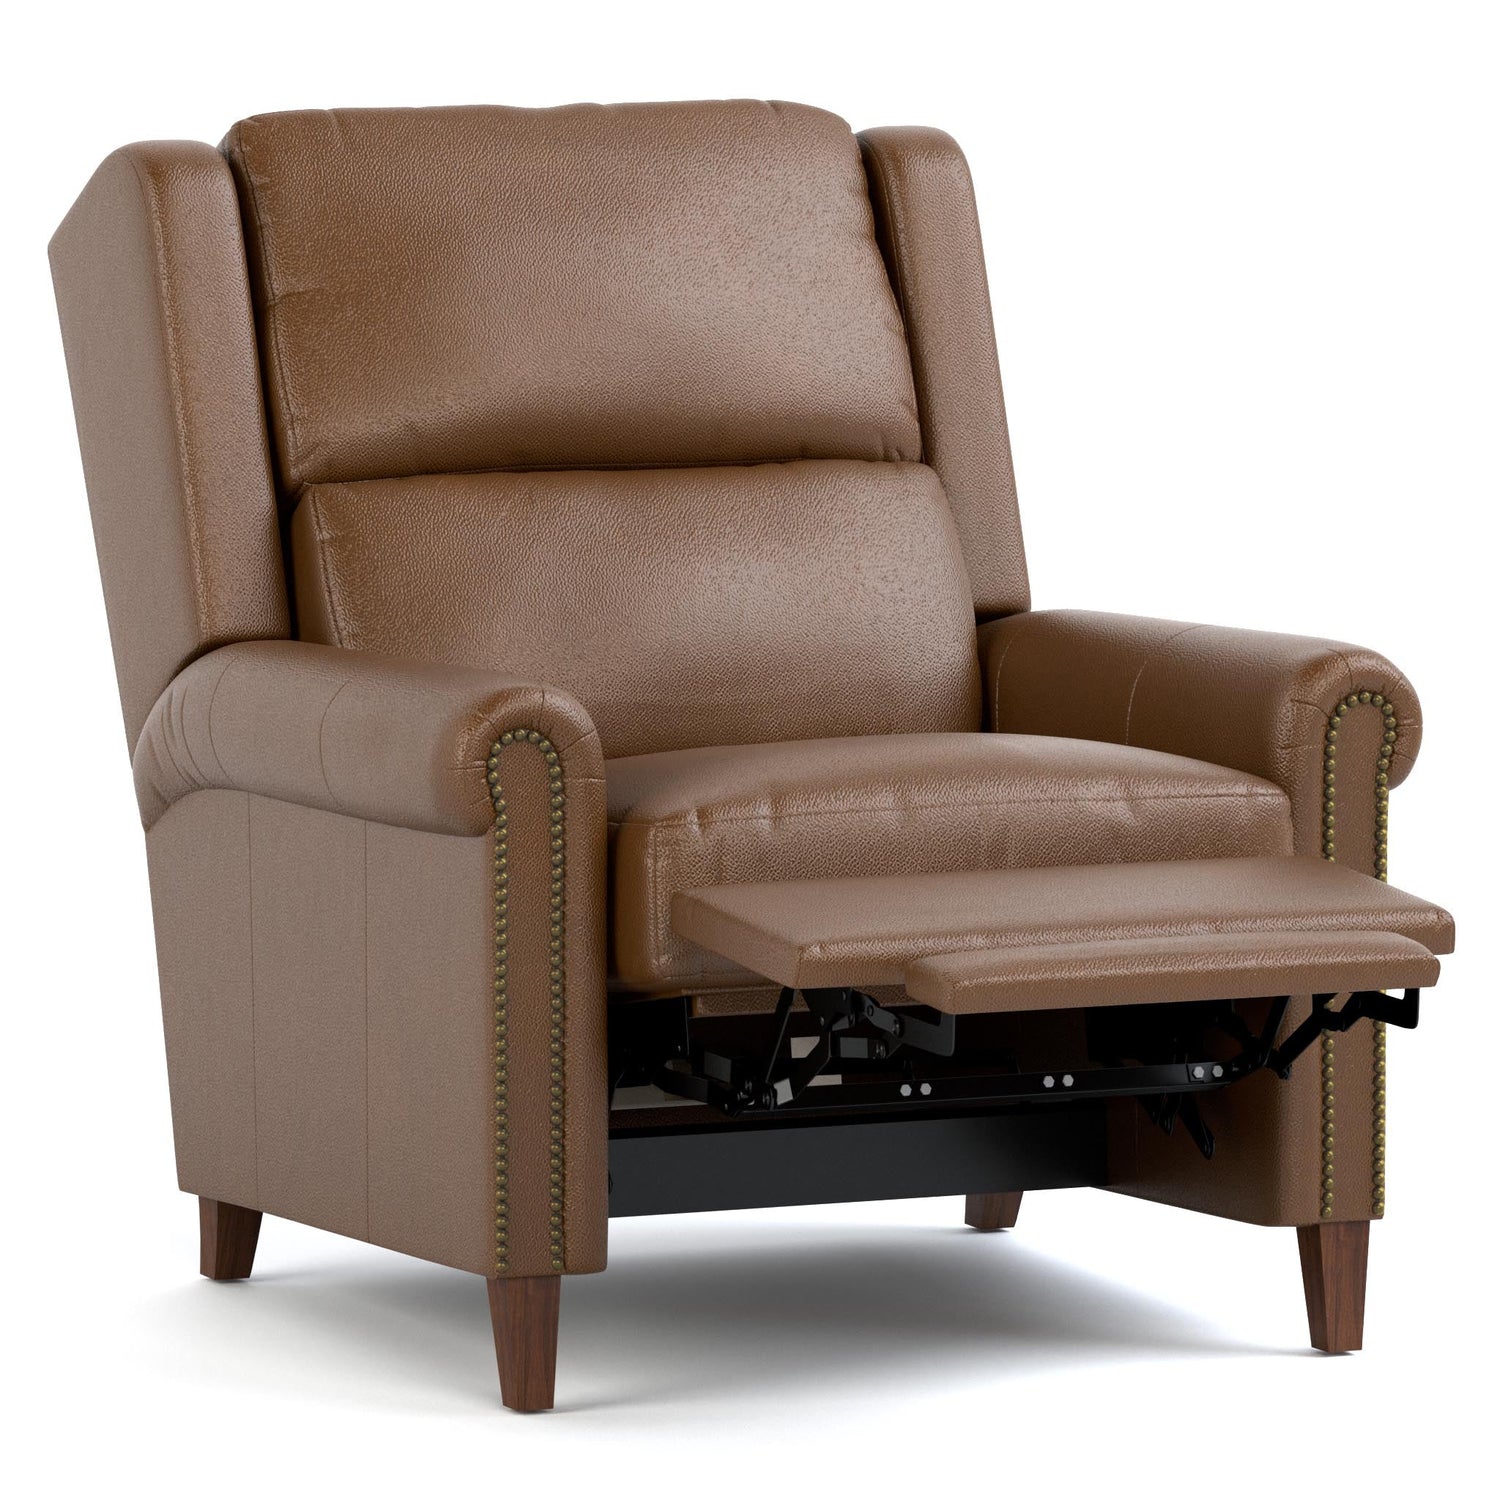 Woodlands Small Roll Arm Manual Recliner with Nails Selvano Bark - Angle Reclined